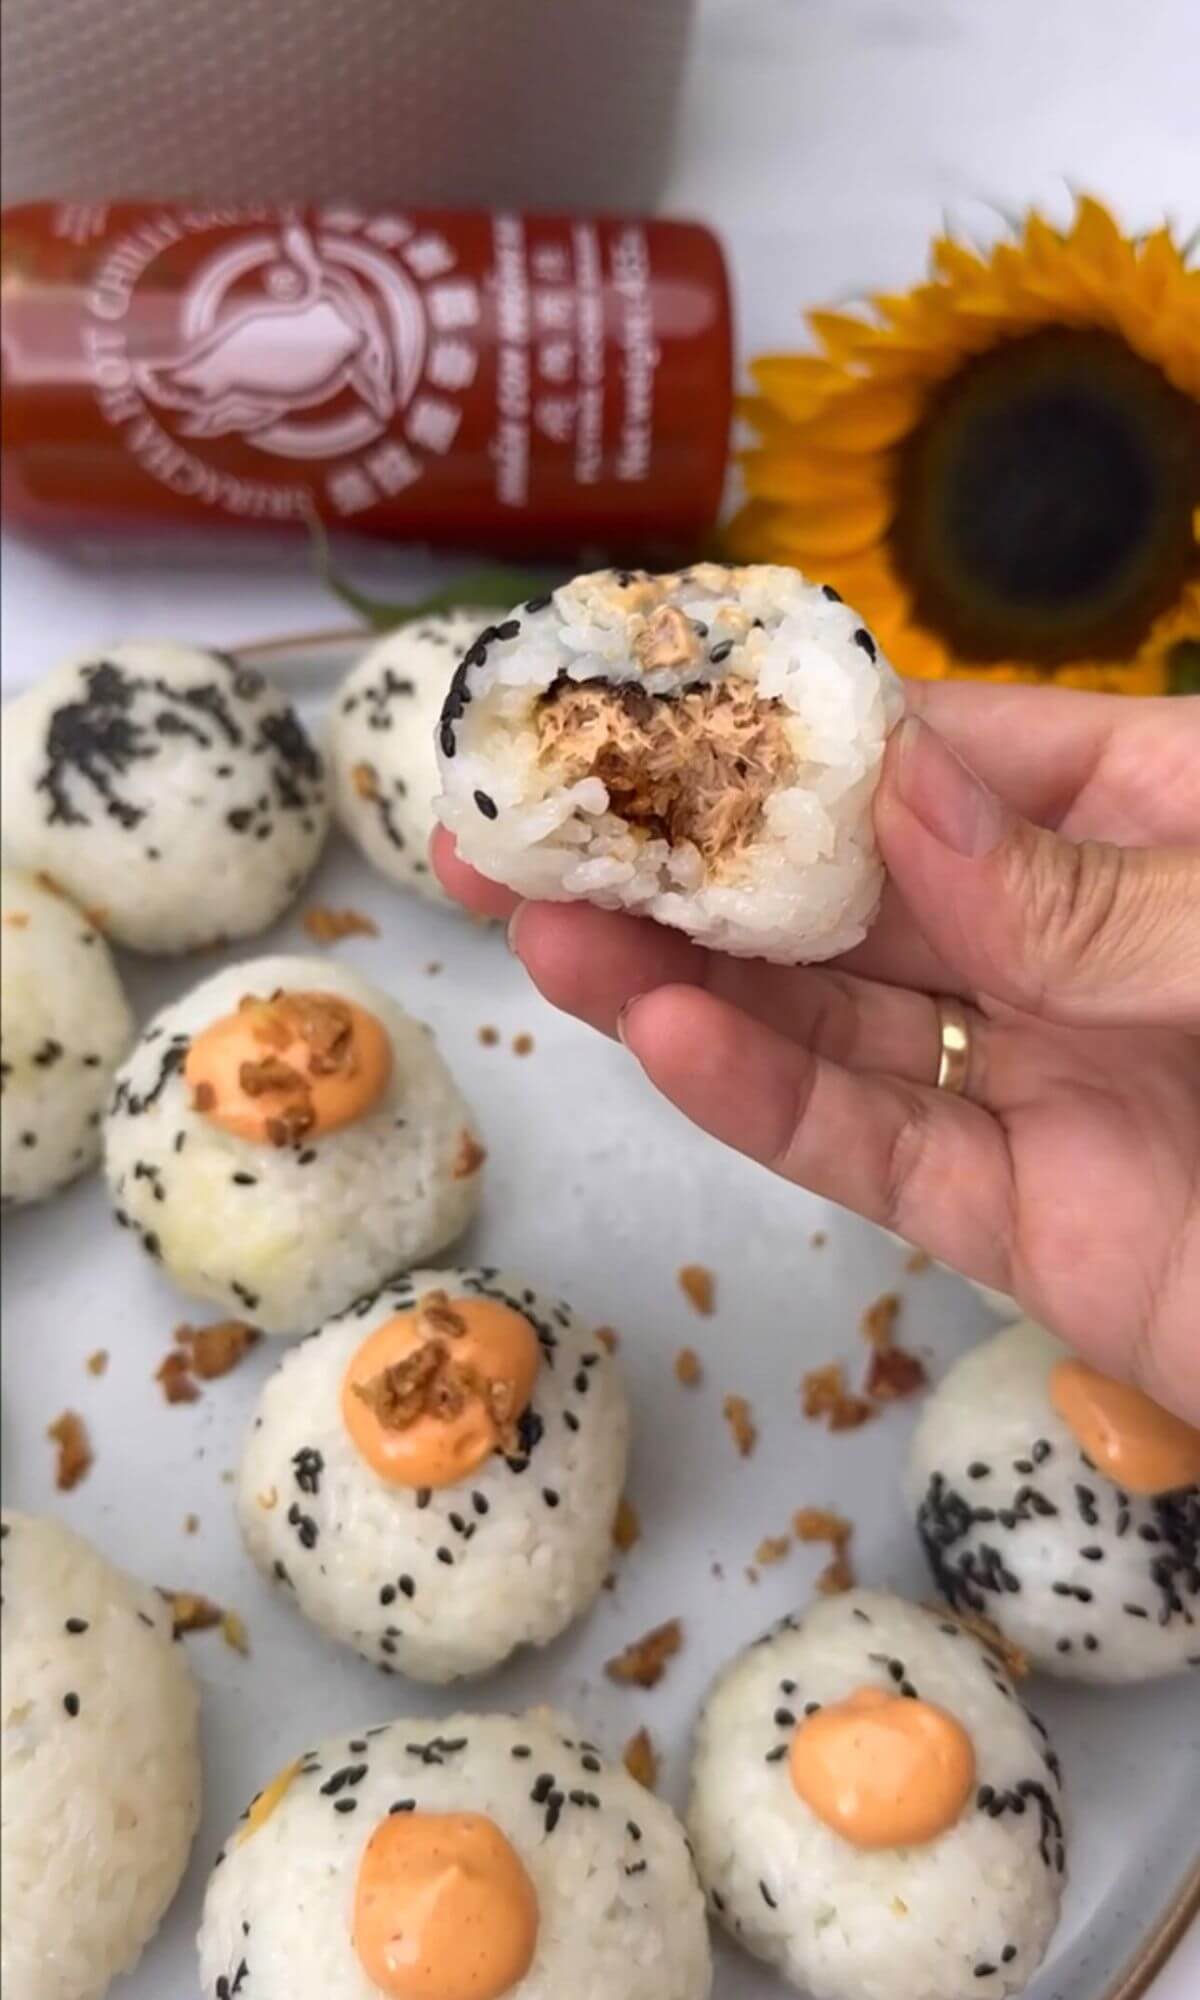 The image depicts a hand holding a rice ball filled with tuna in the center, with sesame seeds sprinkled on top, and bitten in half. In the background, there is a plate of tuna onigiri, a bottle of sriracha sauce, and a sunflower.